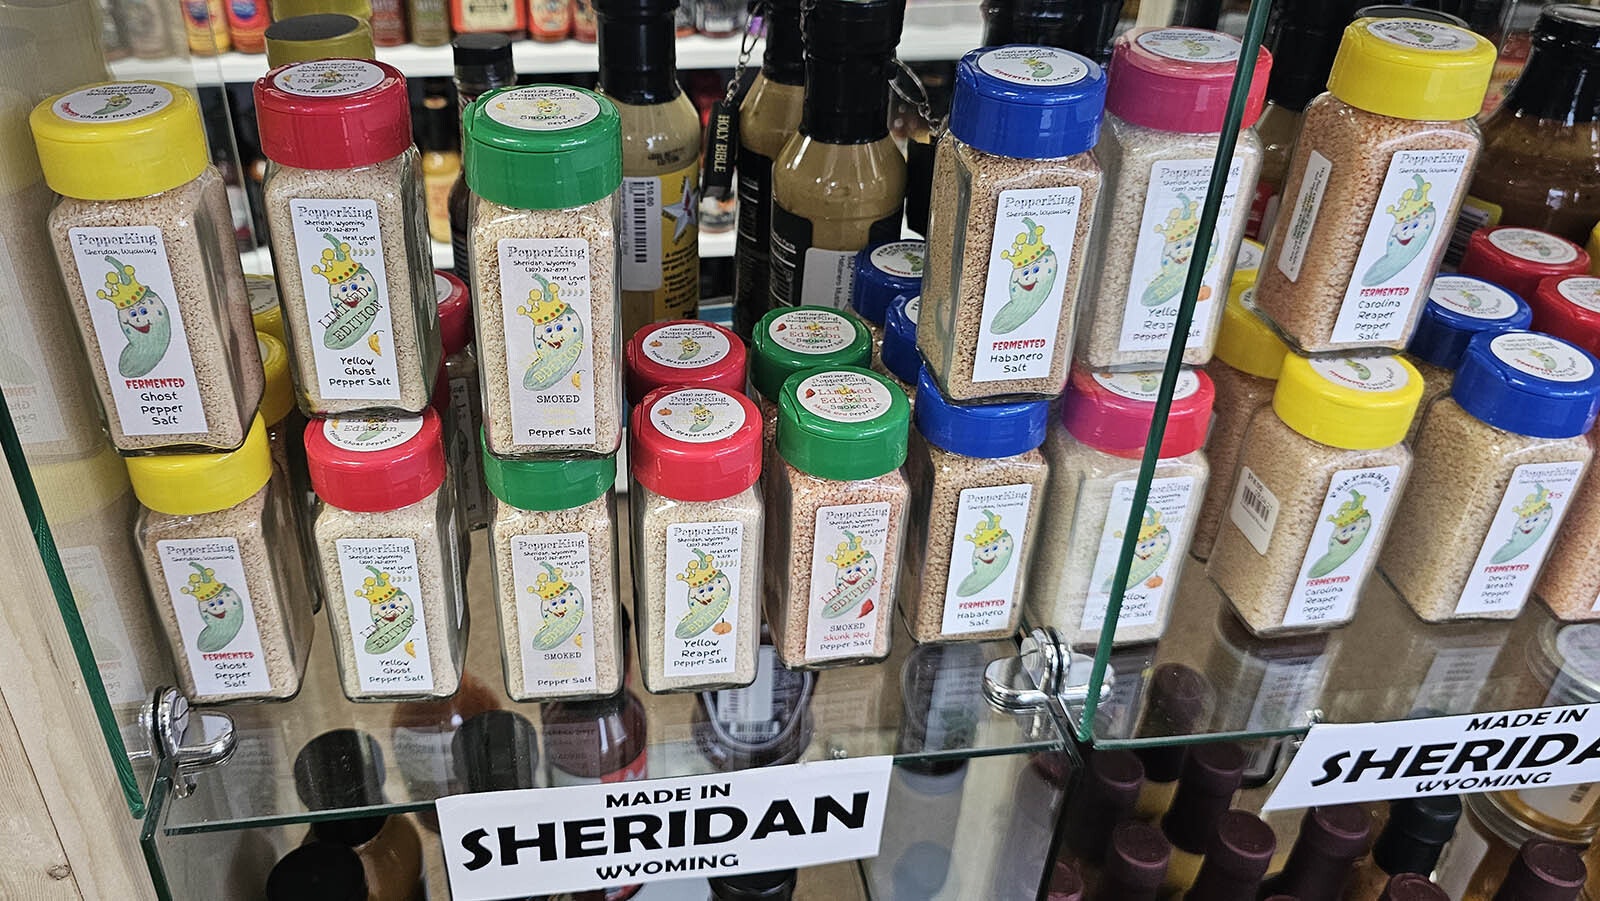 A set of hot spice mixes made in Sheridan is among the store's hot food products made in Wyoming.